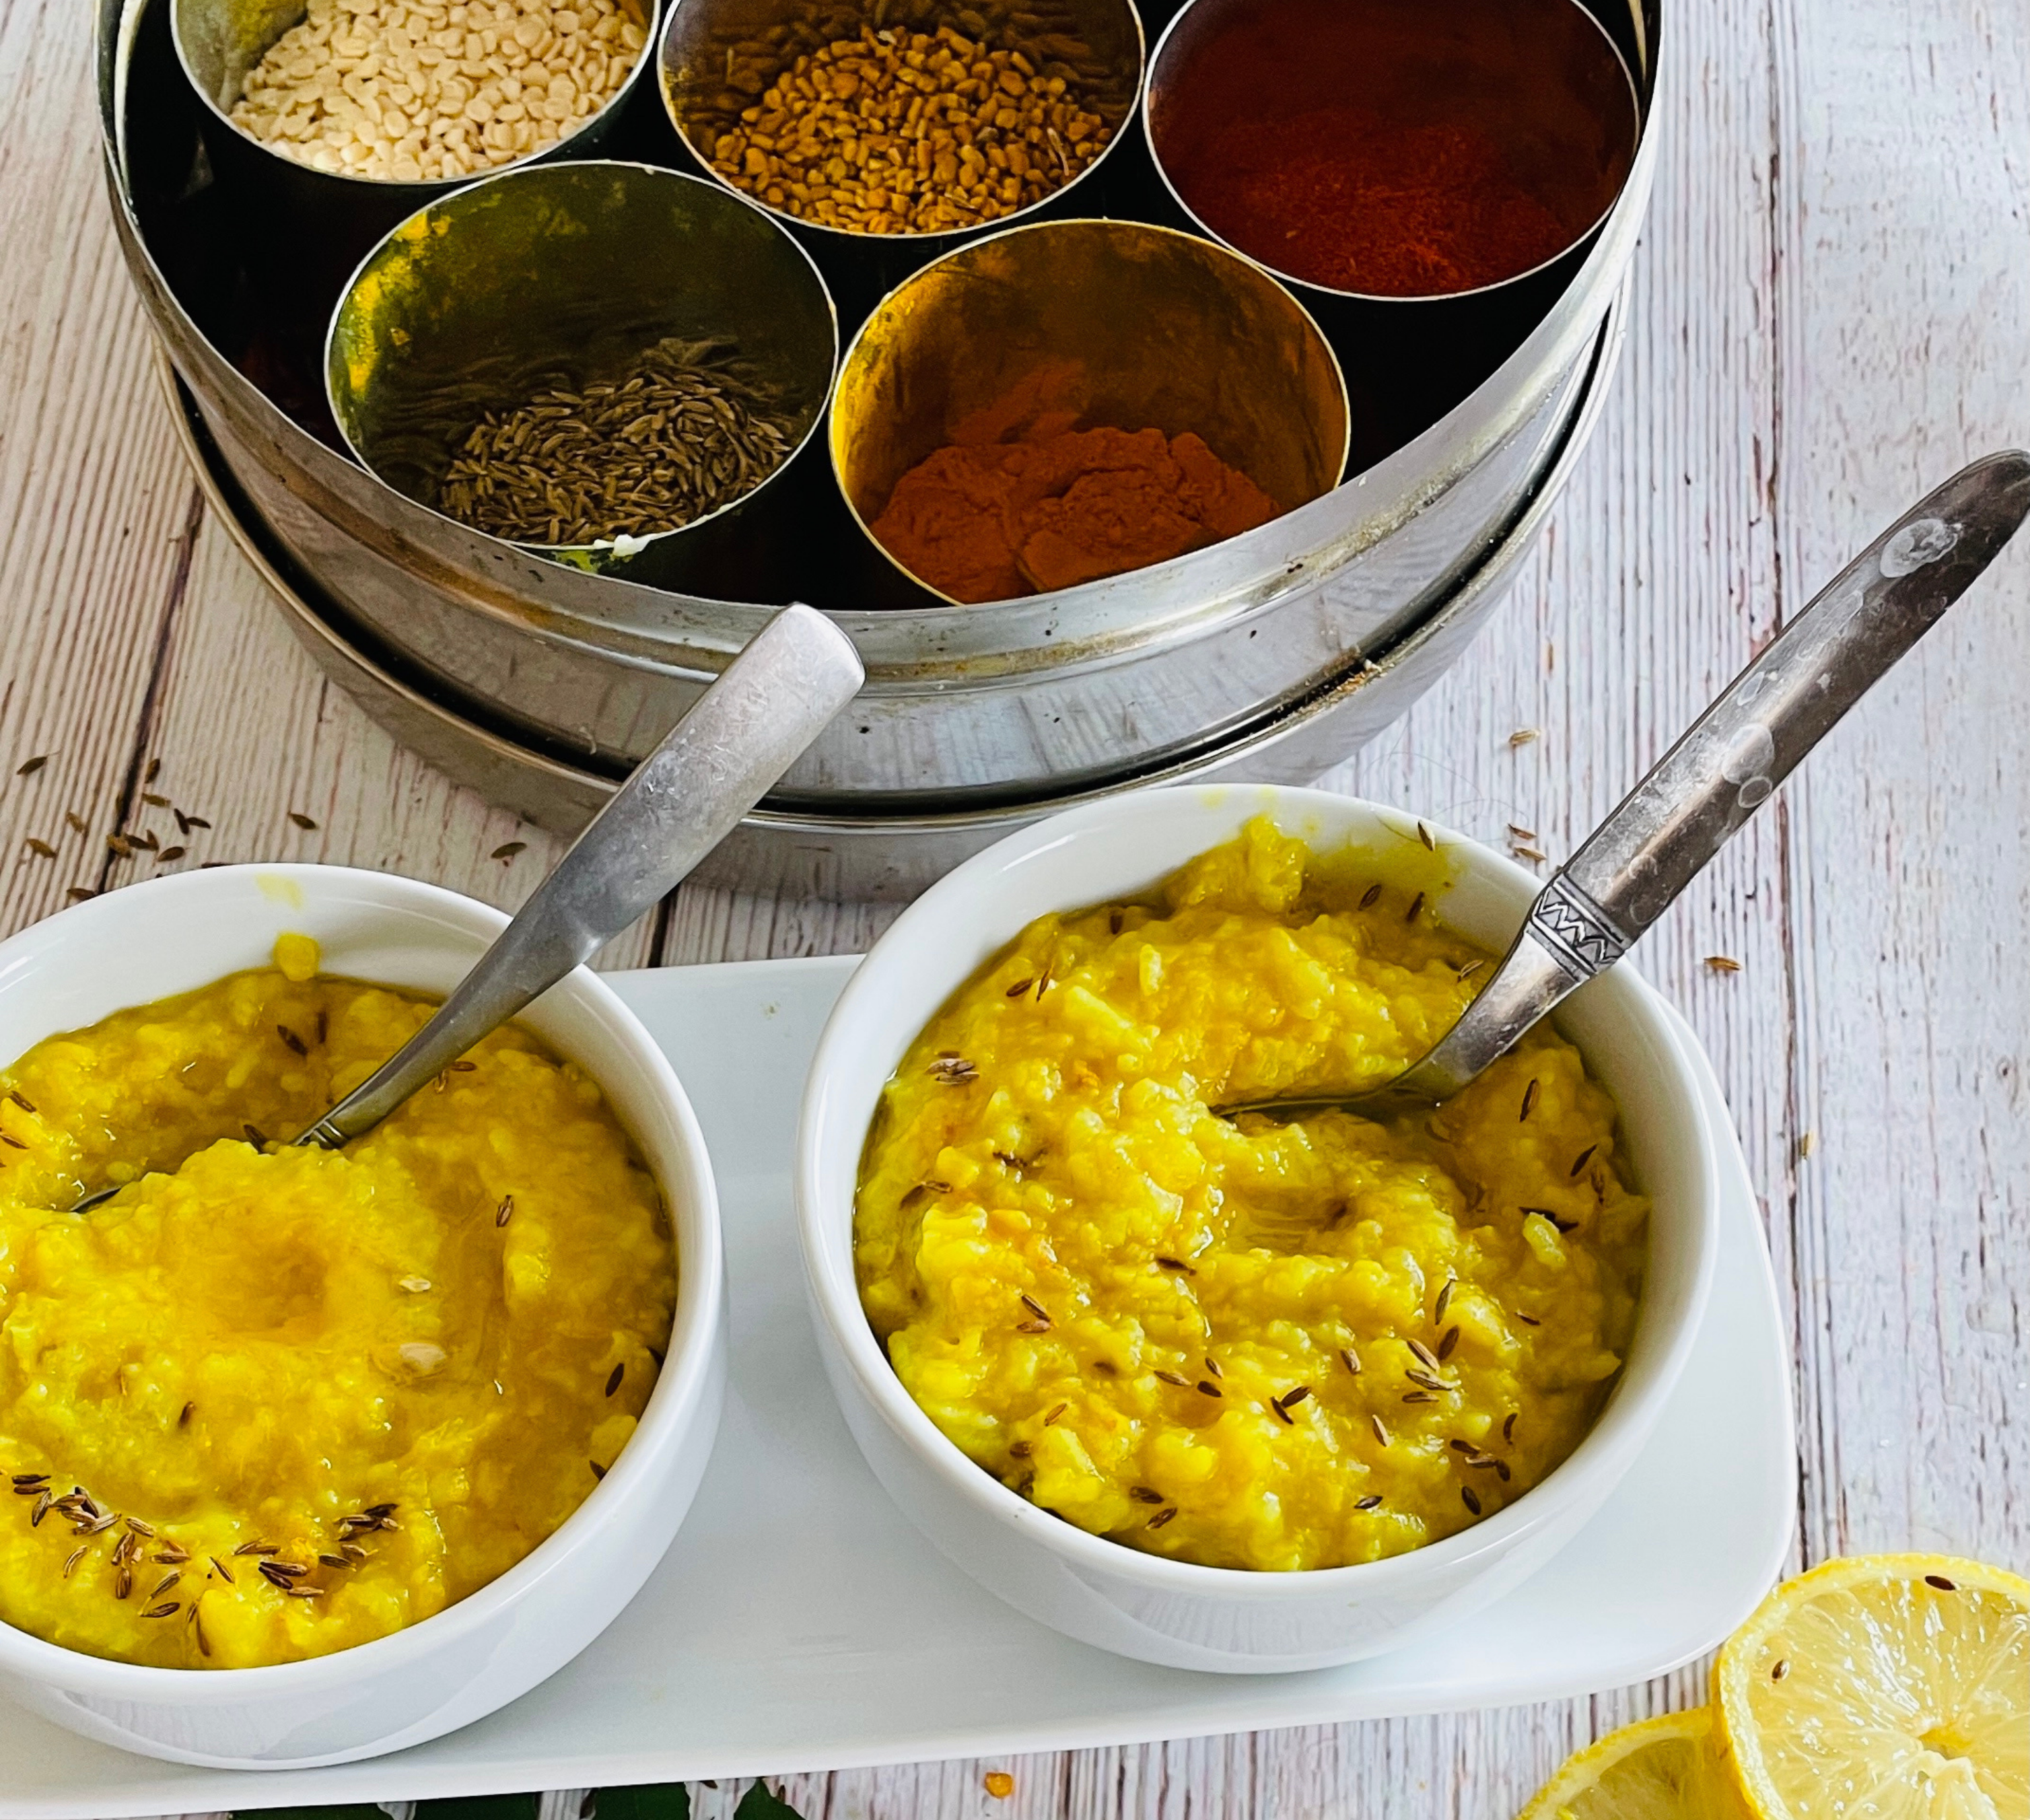 Traditional Indian ayurvedic dish combining lentils and rice 